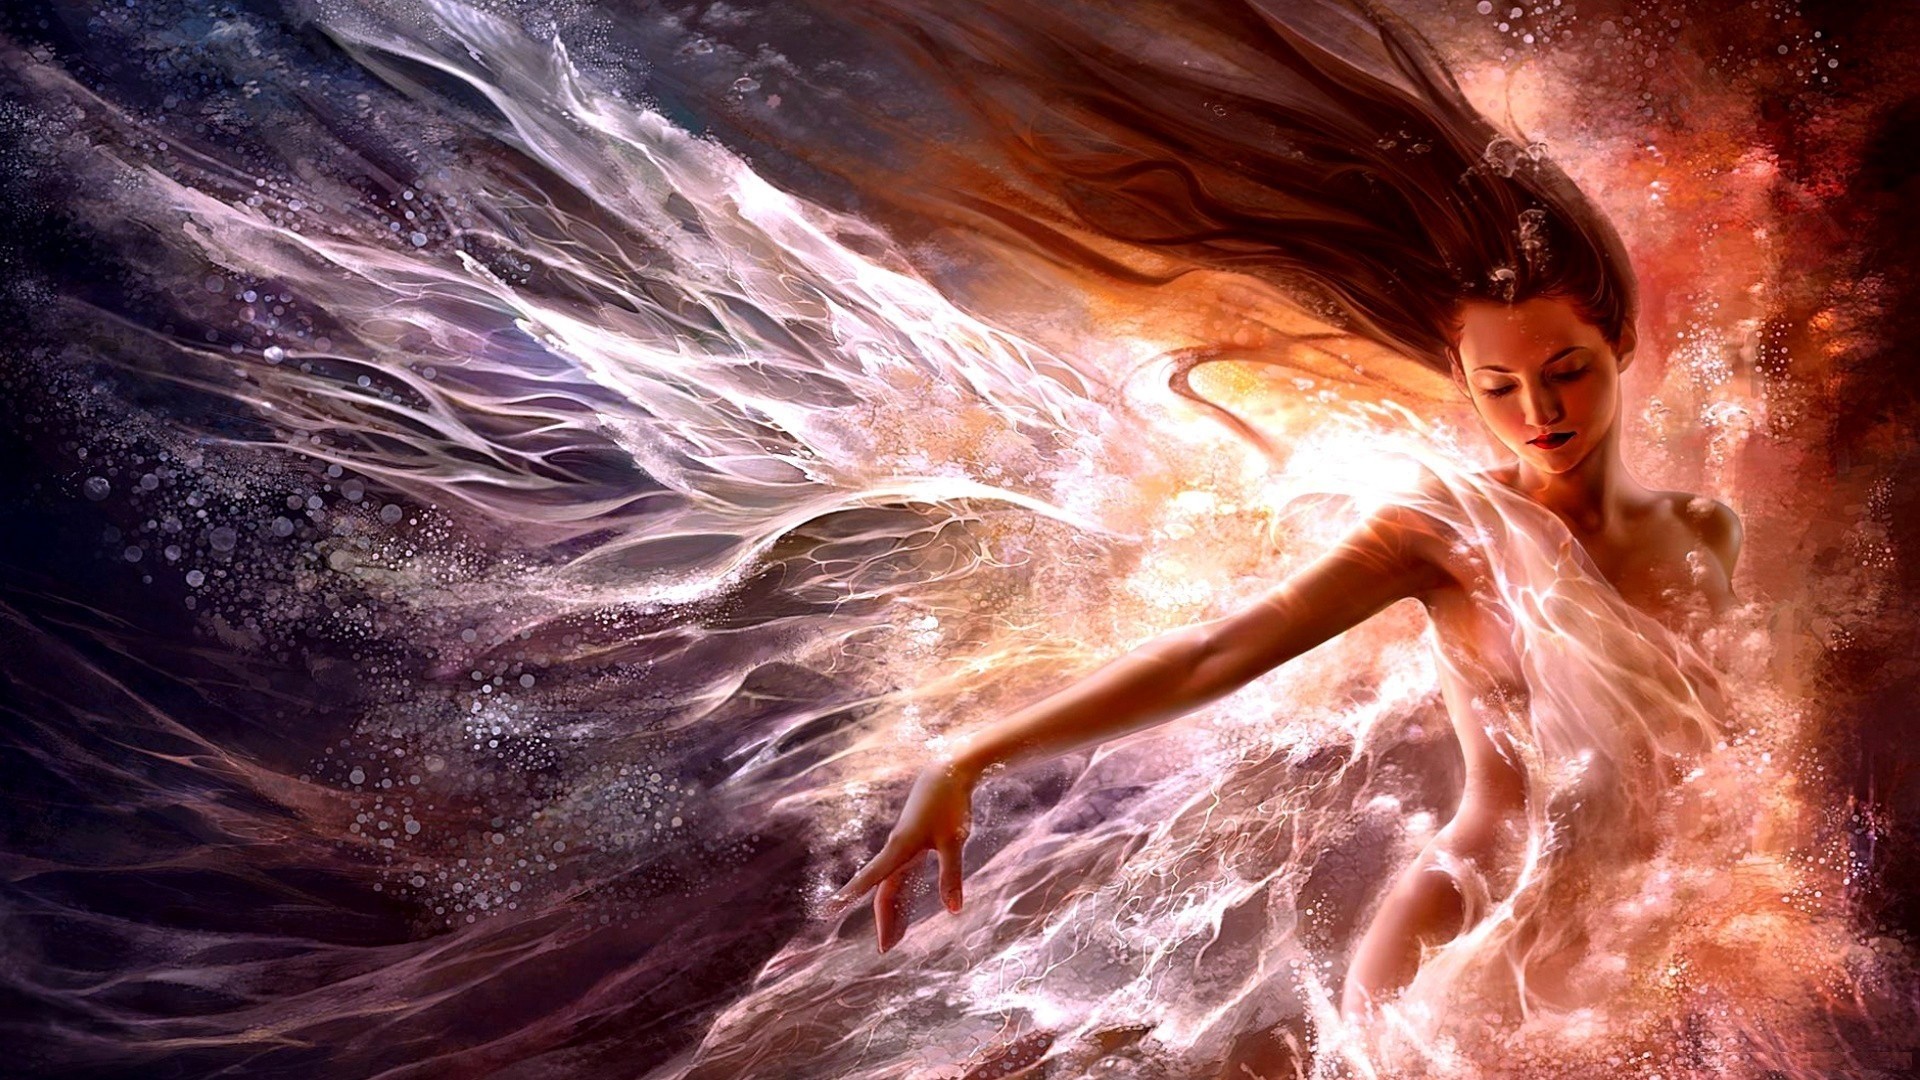 1920x1080 Mystical Fantasy Fairies | To save, right click on image and .